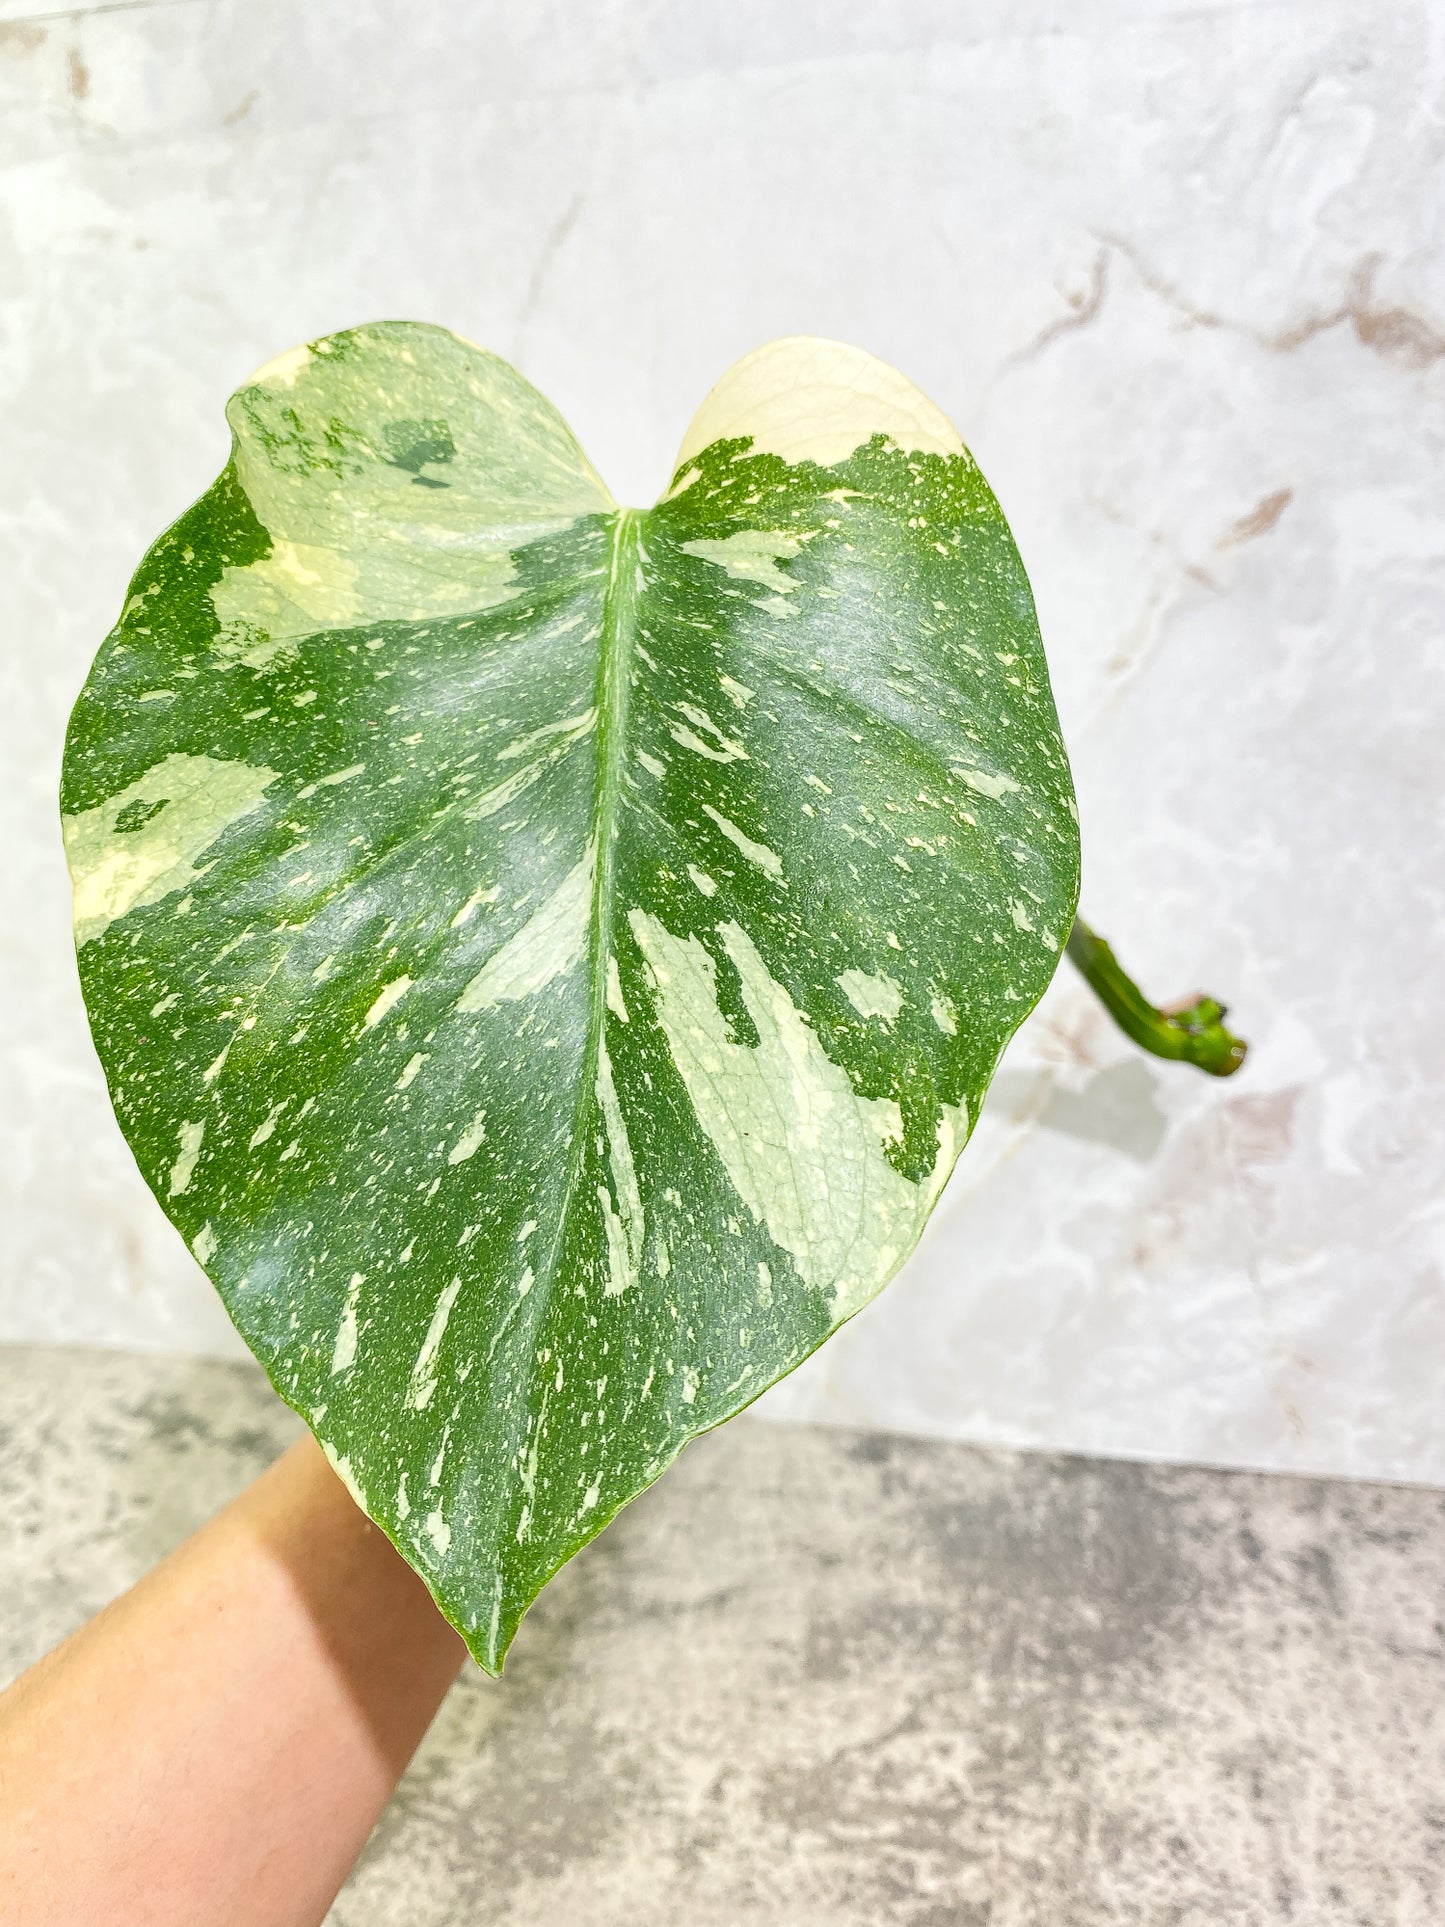 Monstera Thai Constellation 1 leaf unrooted cutting